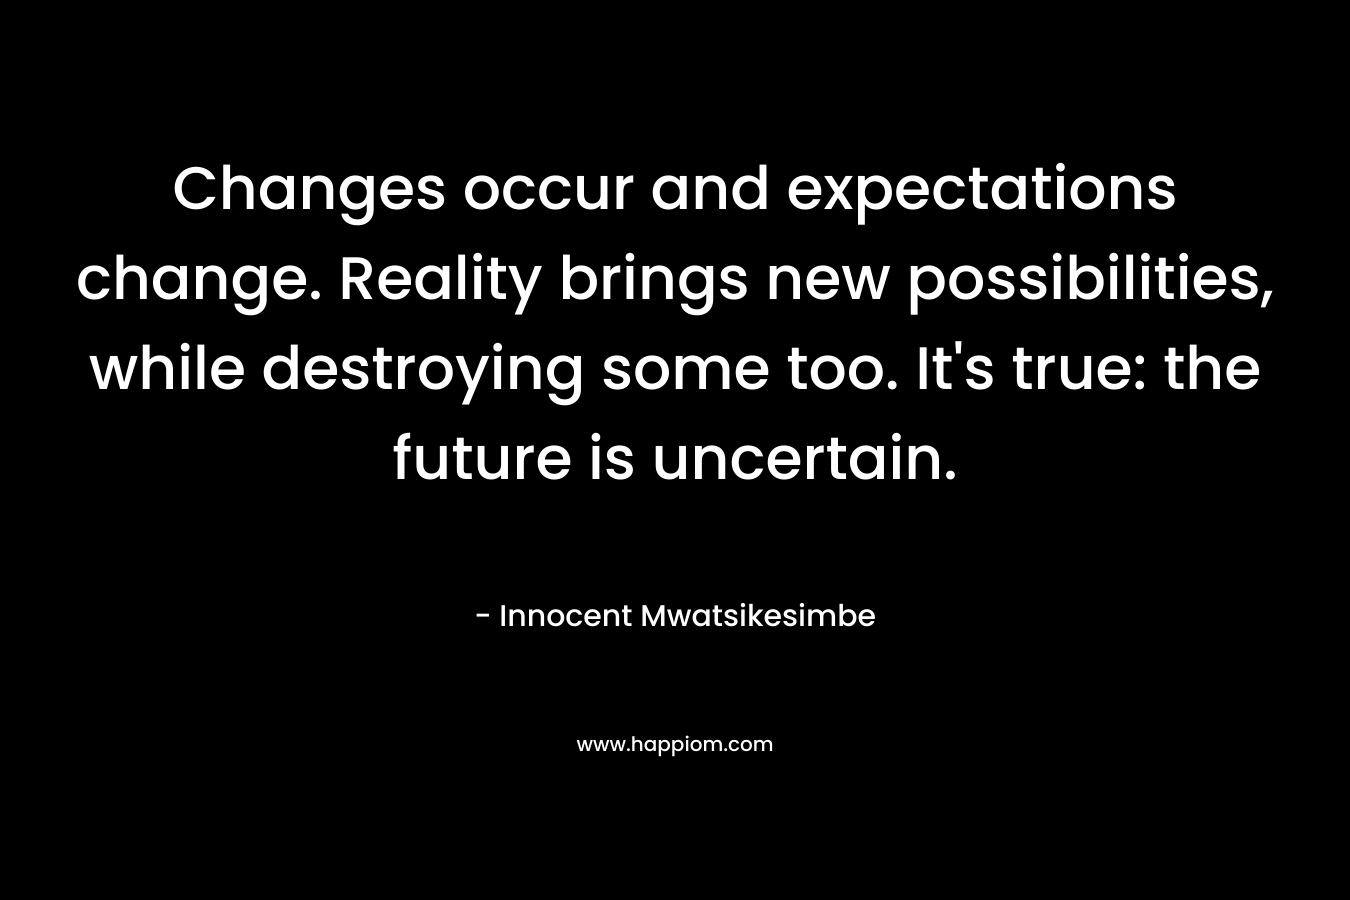 Changes occur and expectations change. Reality brings new possibilities, while destroying some too. It's true: the future is uncertain.